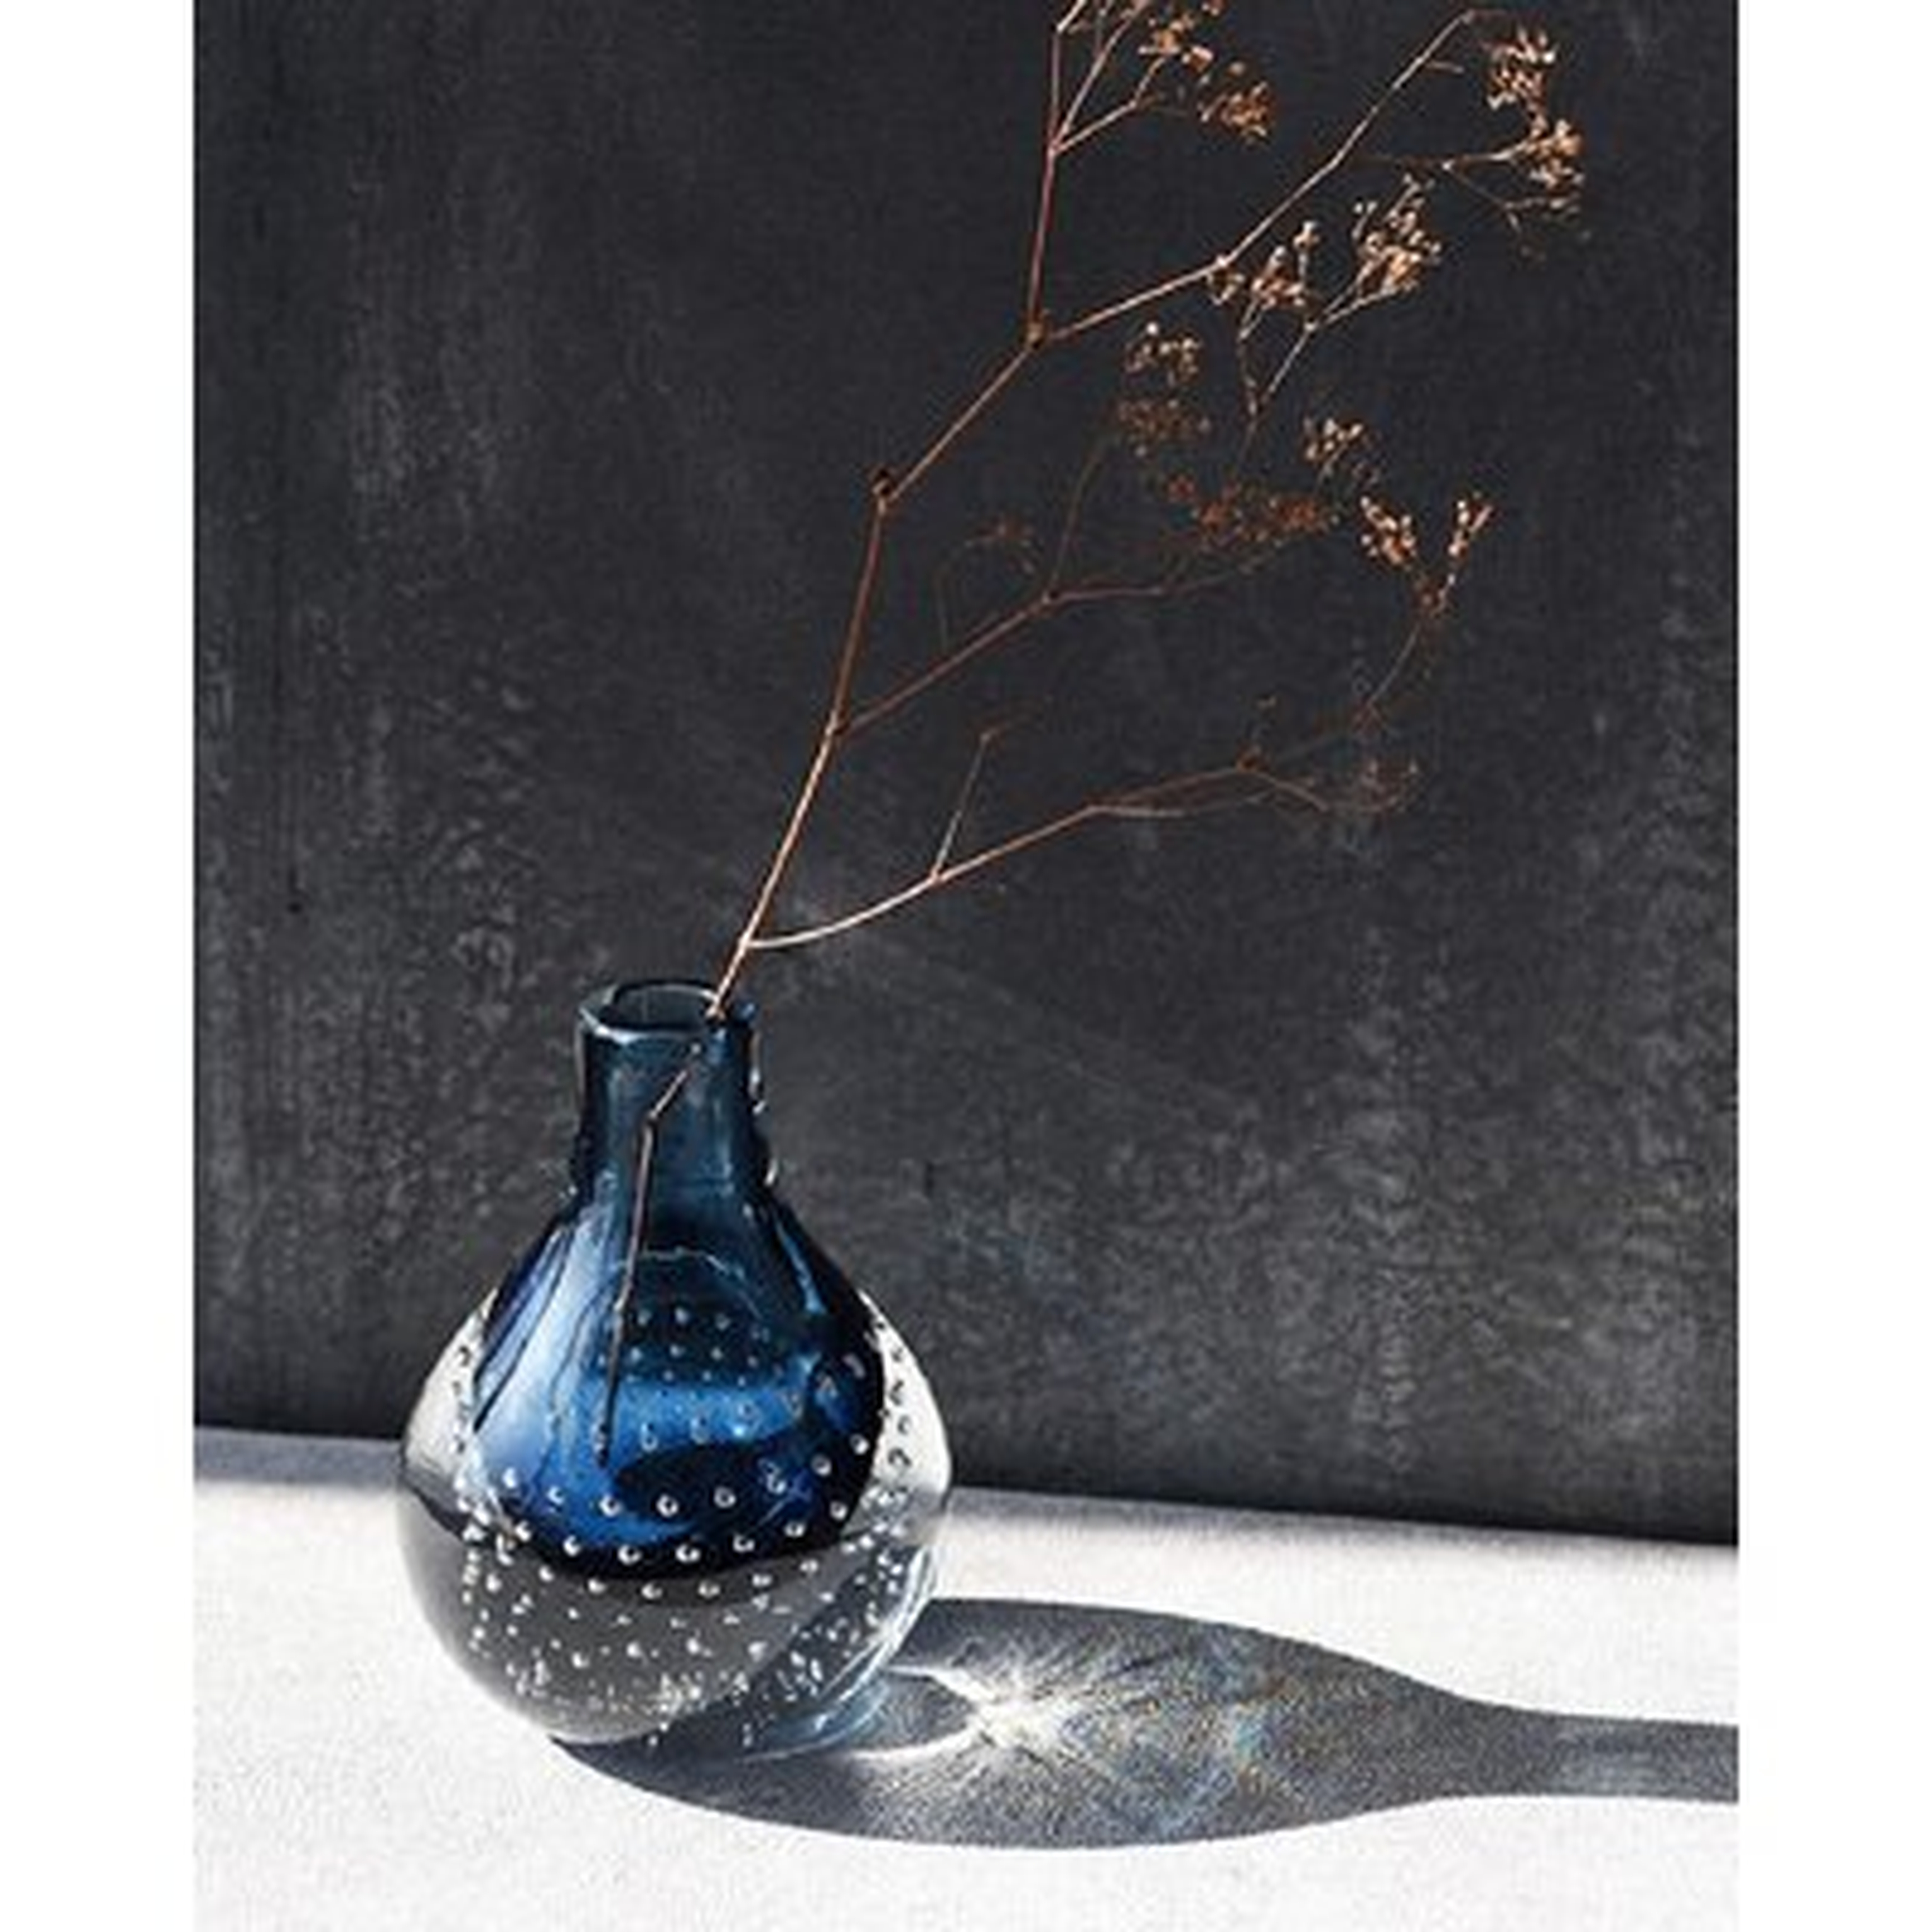 Vase Of Art Glass Gift Bud Flower Hand Blown Home Decor Modern Thick Tabletop With Air Bubbles Solid Blue Color Centerpiece For Wedding Living Dining Office Bar - Wayfair